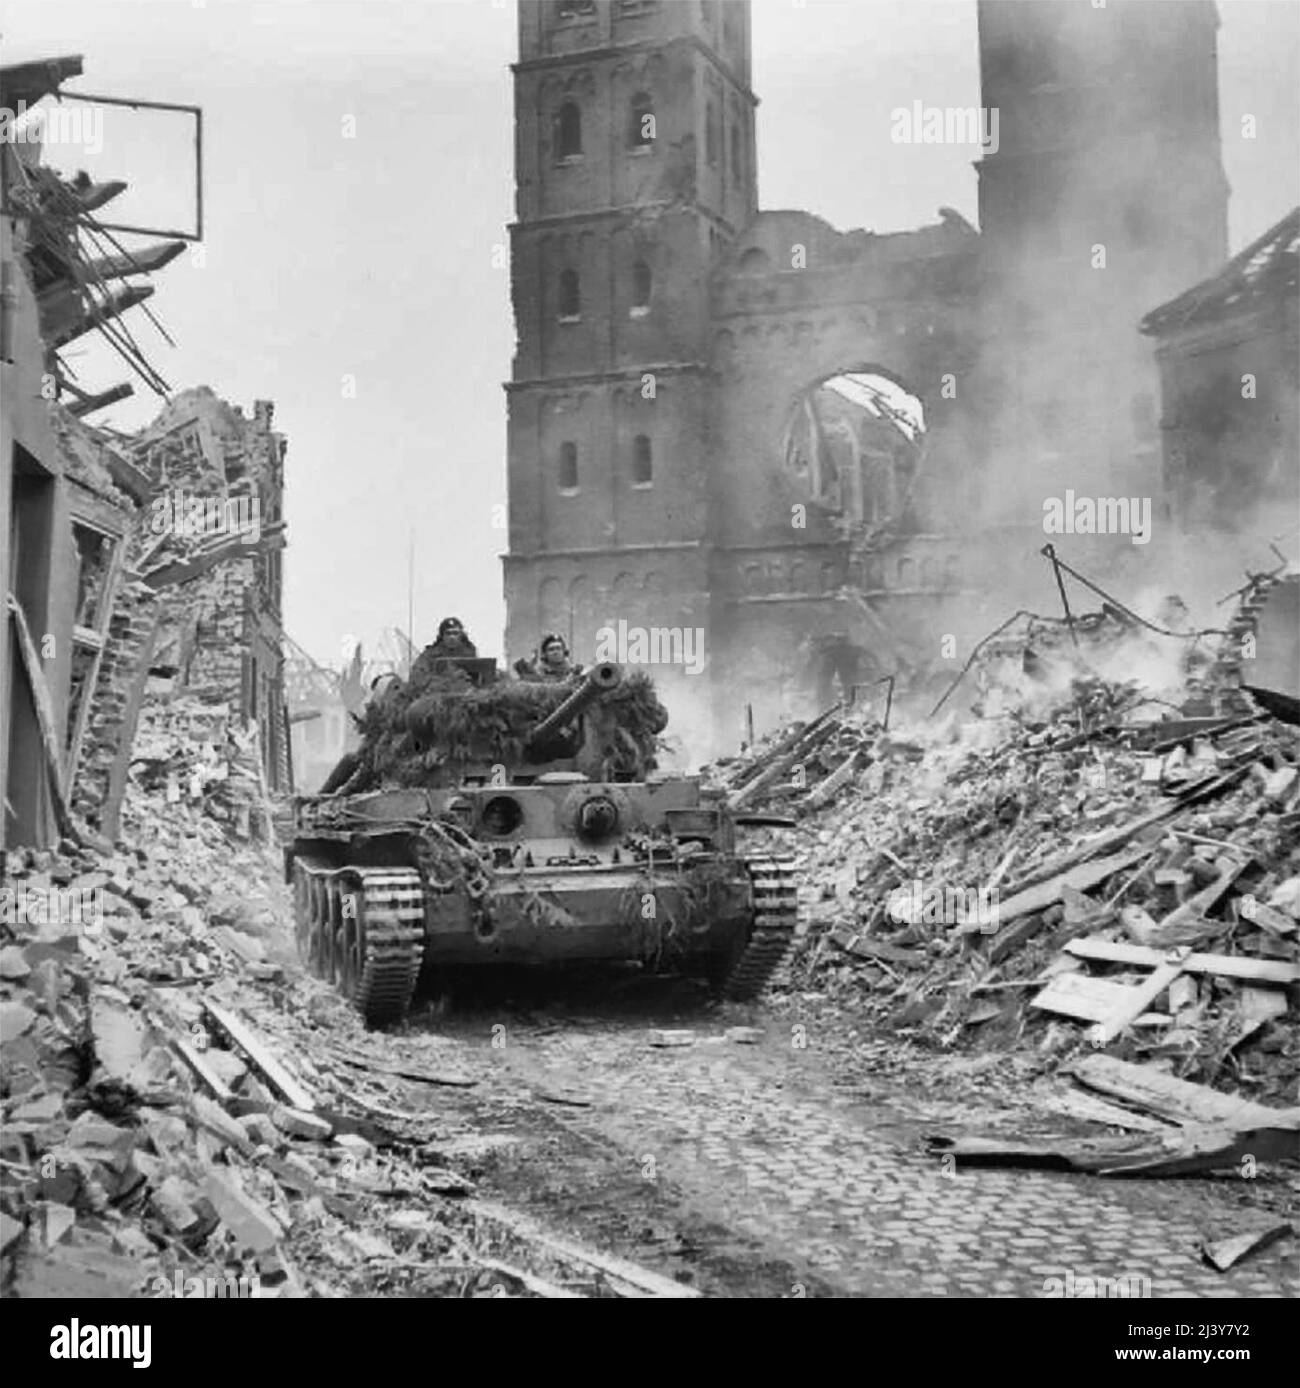 The British Army in North-west Europe 1944-45 A Cromwell tank of 15th/19th King’s Royal Hussars, 11th Armoured Division, with infantry aboard, advances through the rubble of Uedem, Germany, 28 February 1945. Stock Photo